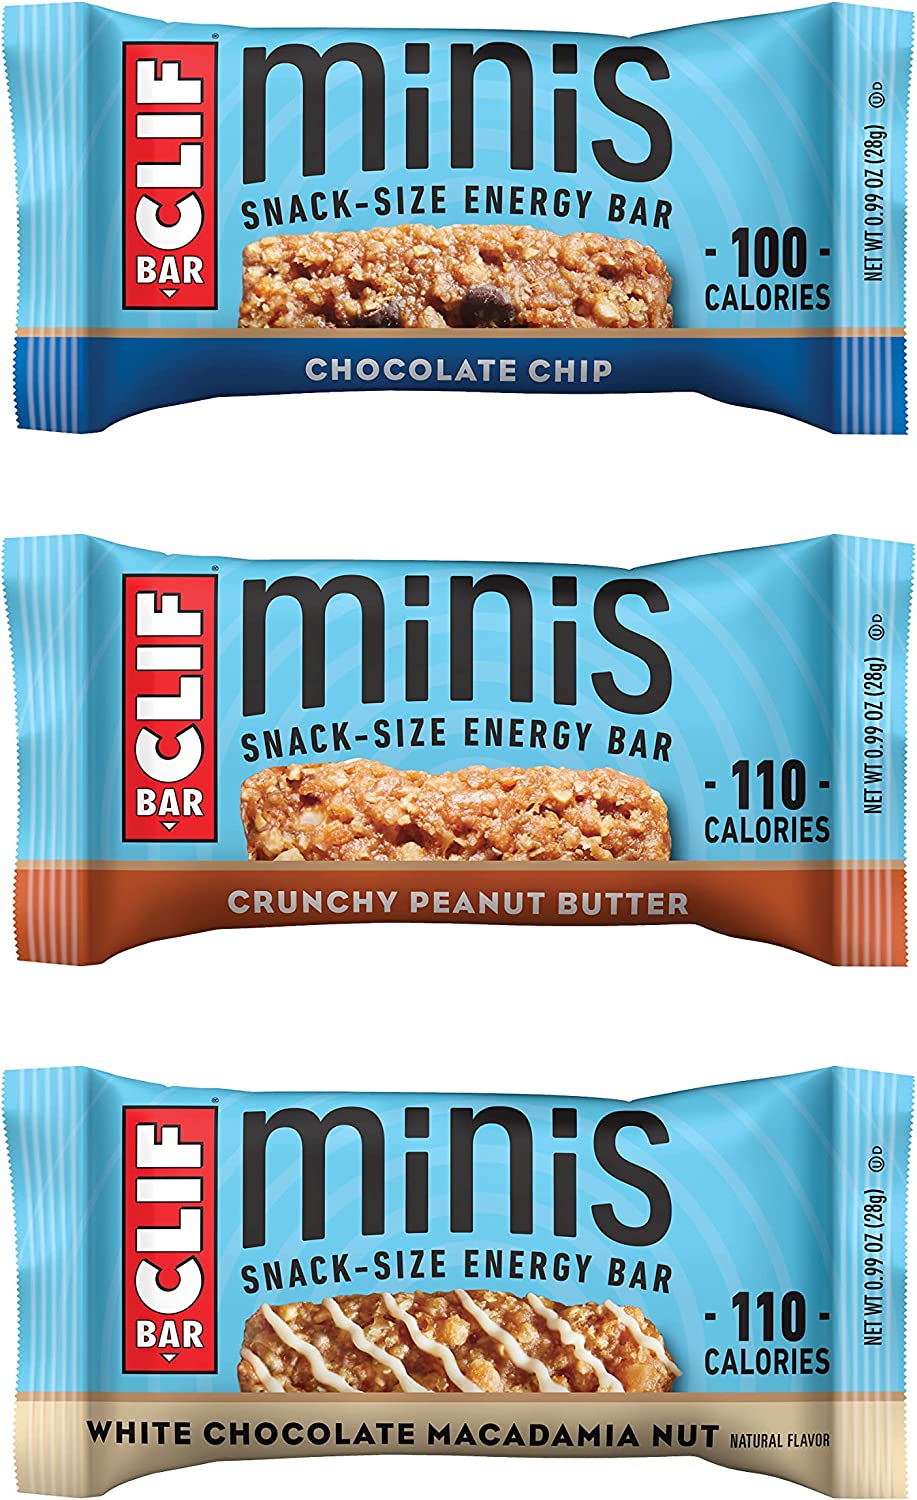 CLIF BARS – Mini Energy Bar Variety Pack – Chocolate Chip, Crunchy Peanut Butter, White Chocolate Macadamia Nut – Made with Organic Oats – Plant Based (0.99 Oz Snack Bar, 30 Count) Packaging May Vary